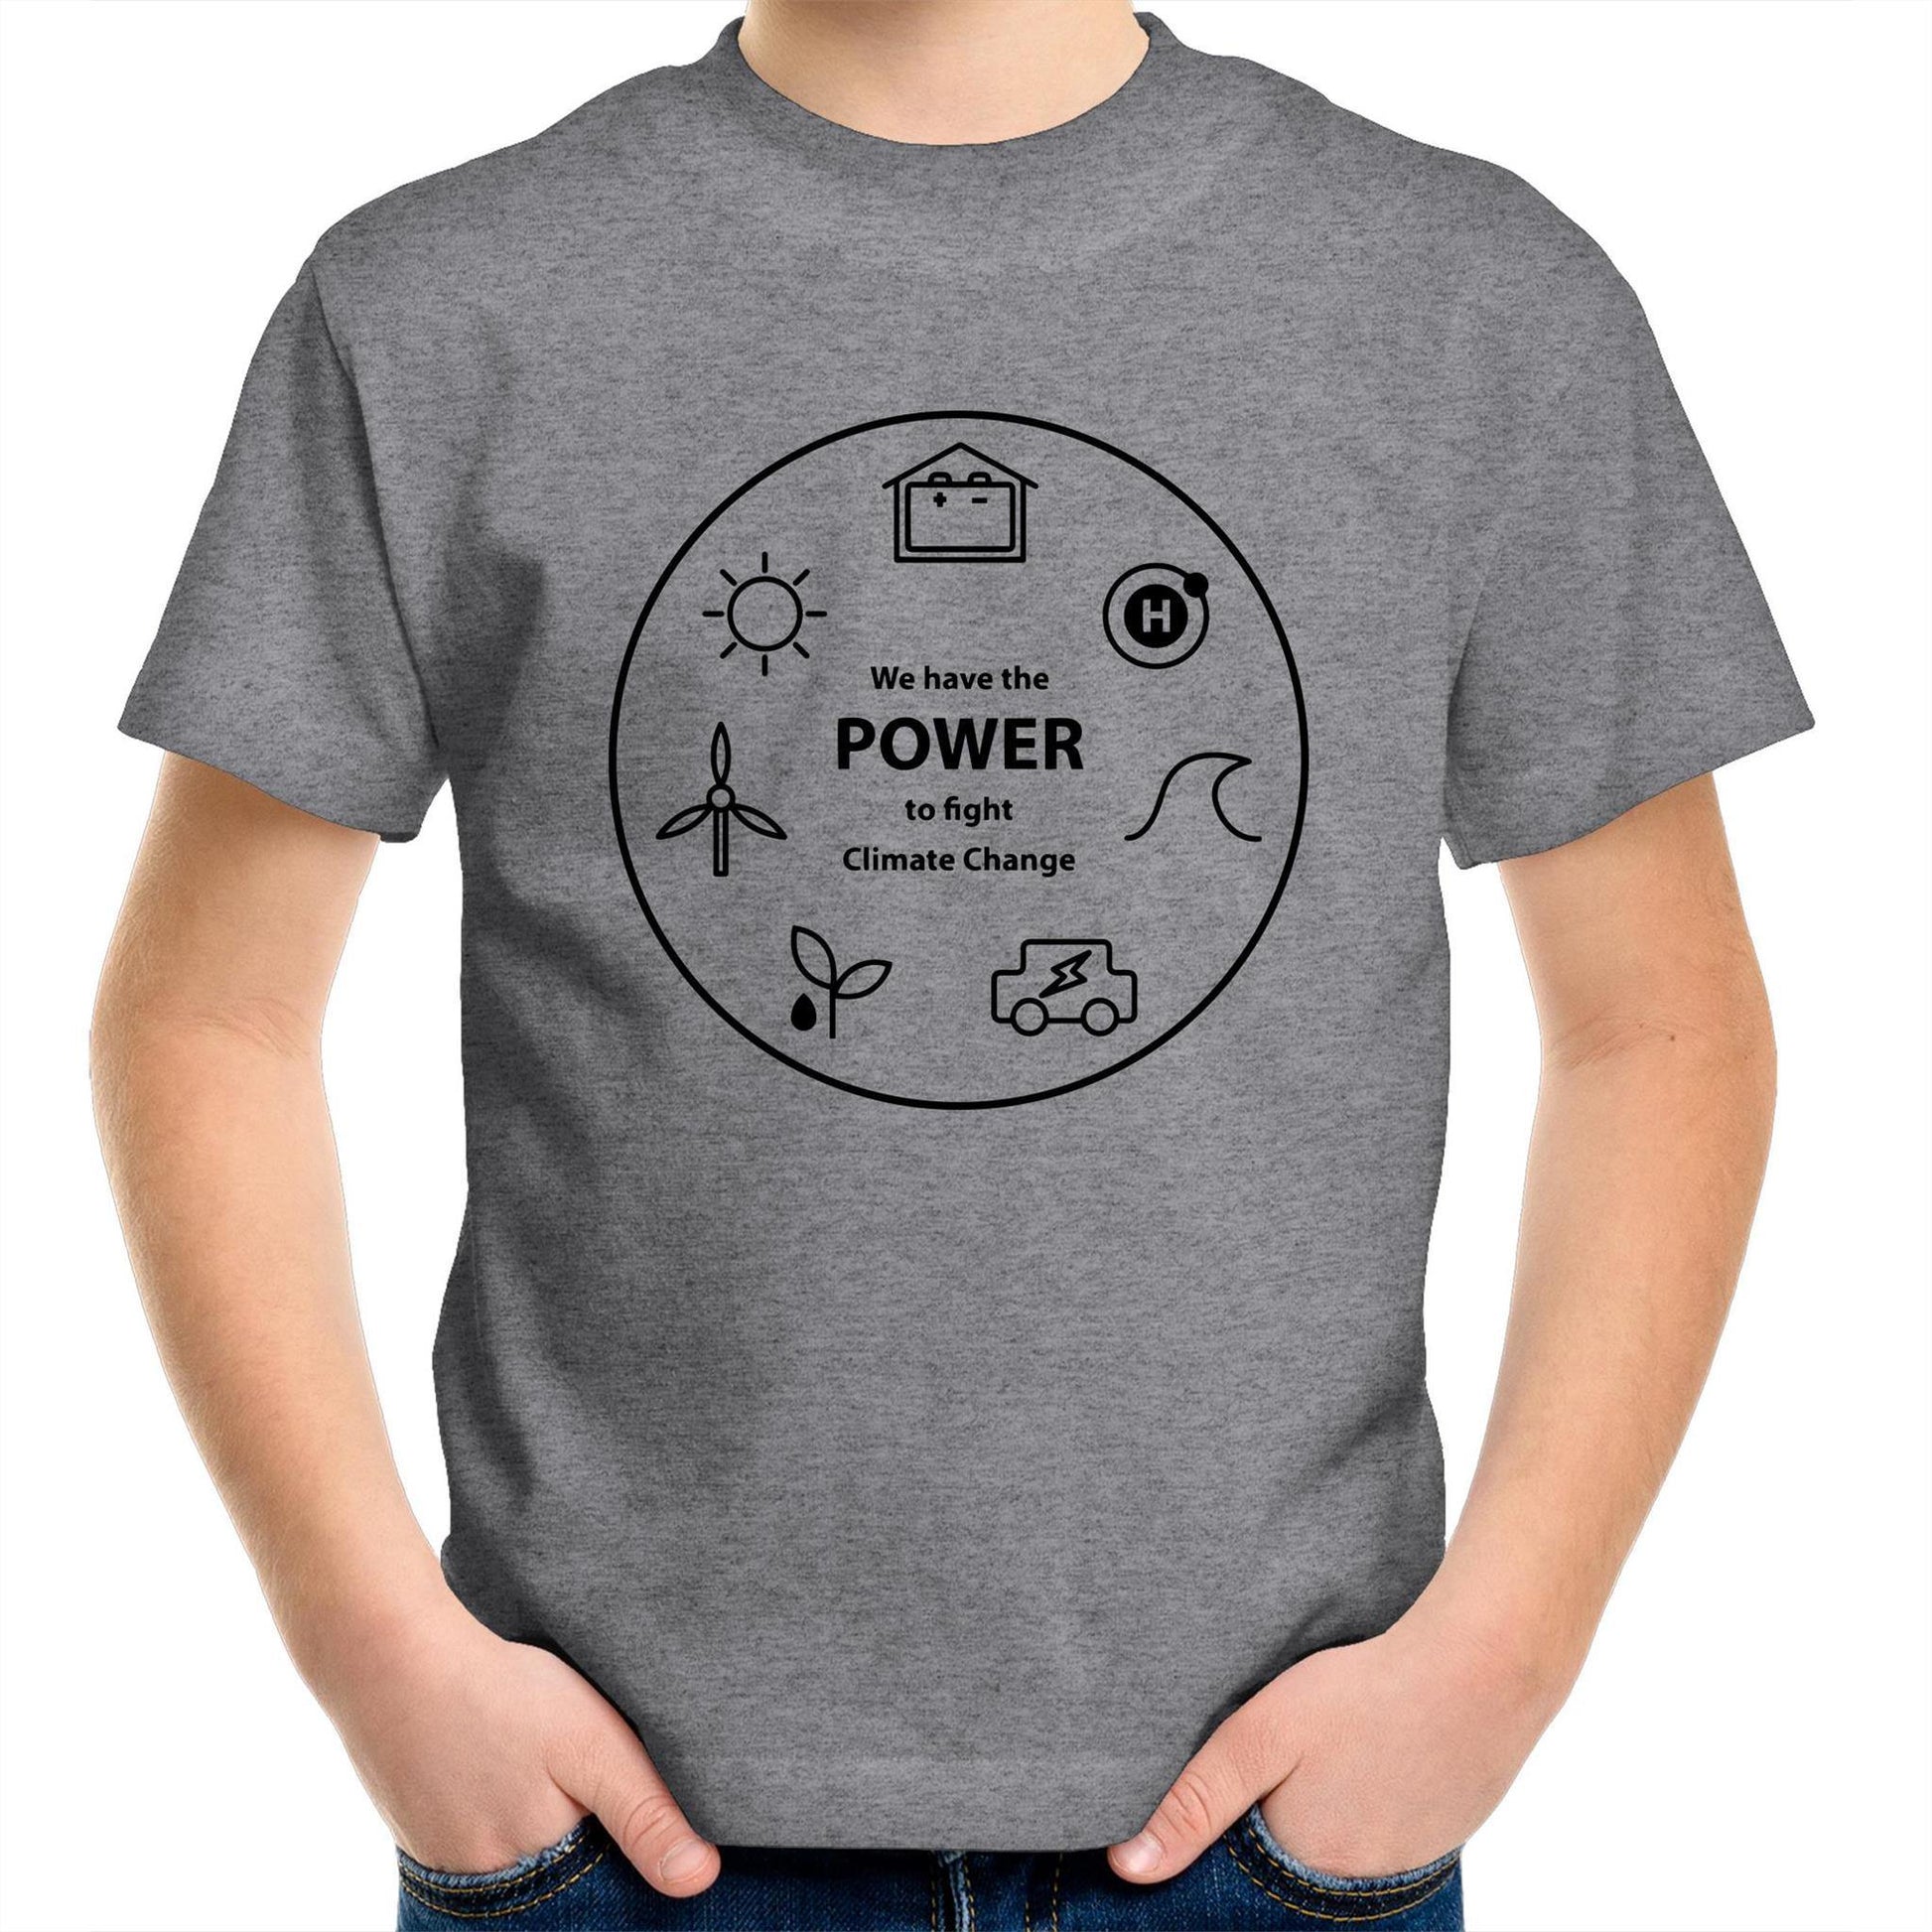 We Have The Power - Kids Youth Crew T-Shirt Grey Marle Kids Youth T-shirt Environment